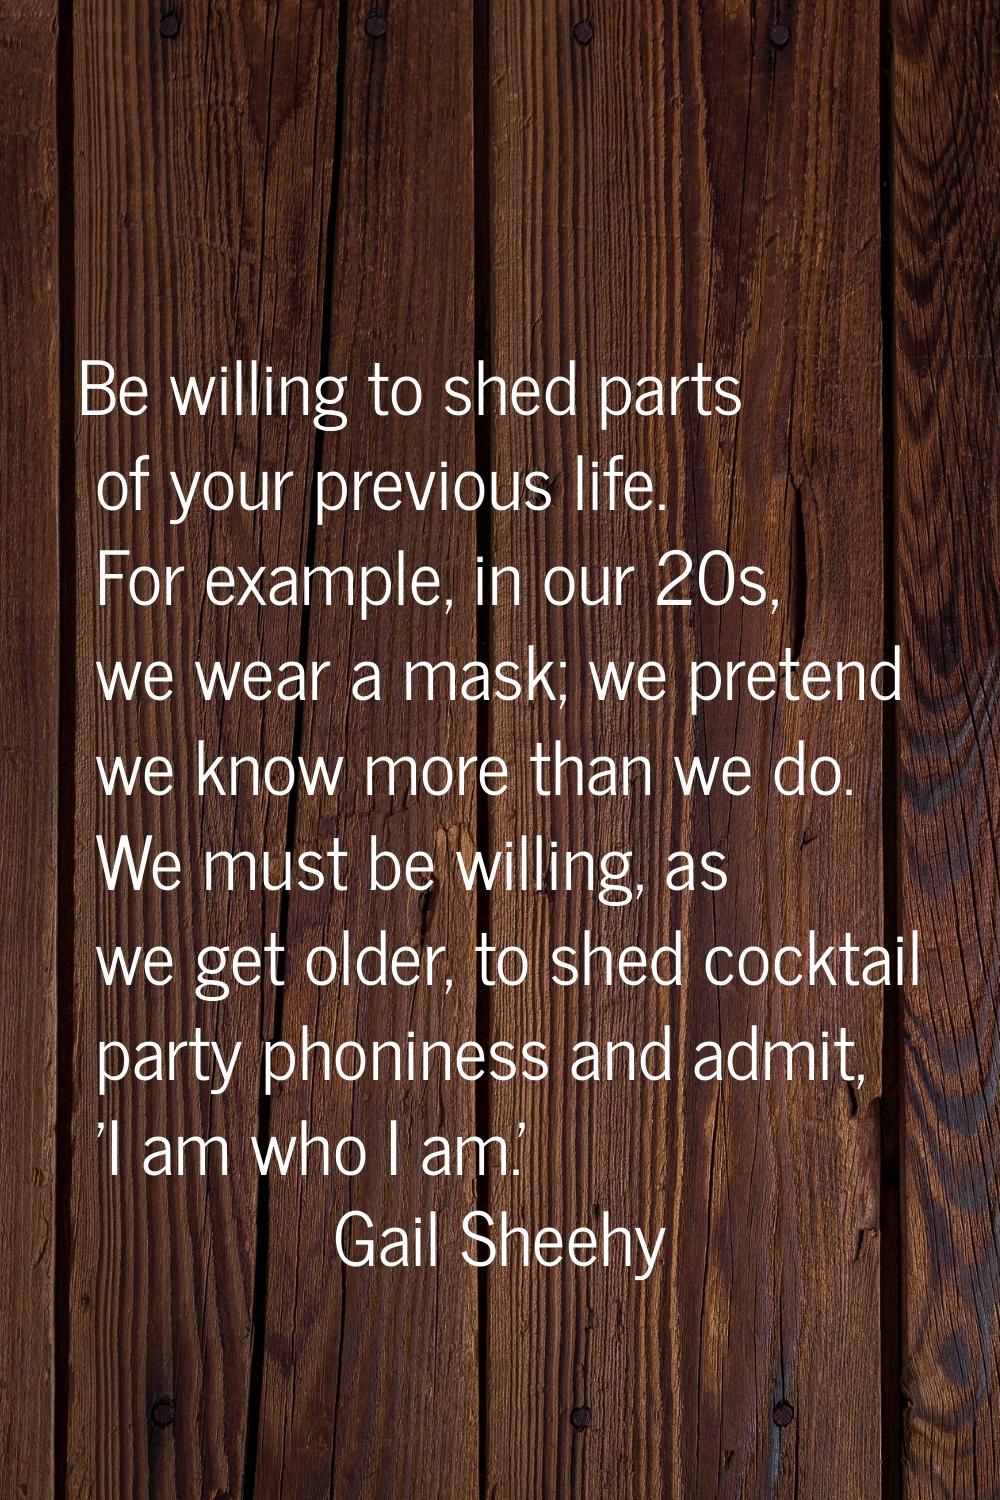 Be willing to shed parts of your previous life. For example, in our 20s, we wear a mask; we pretend